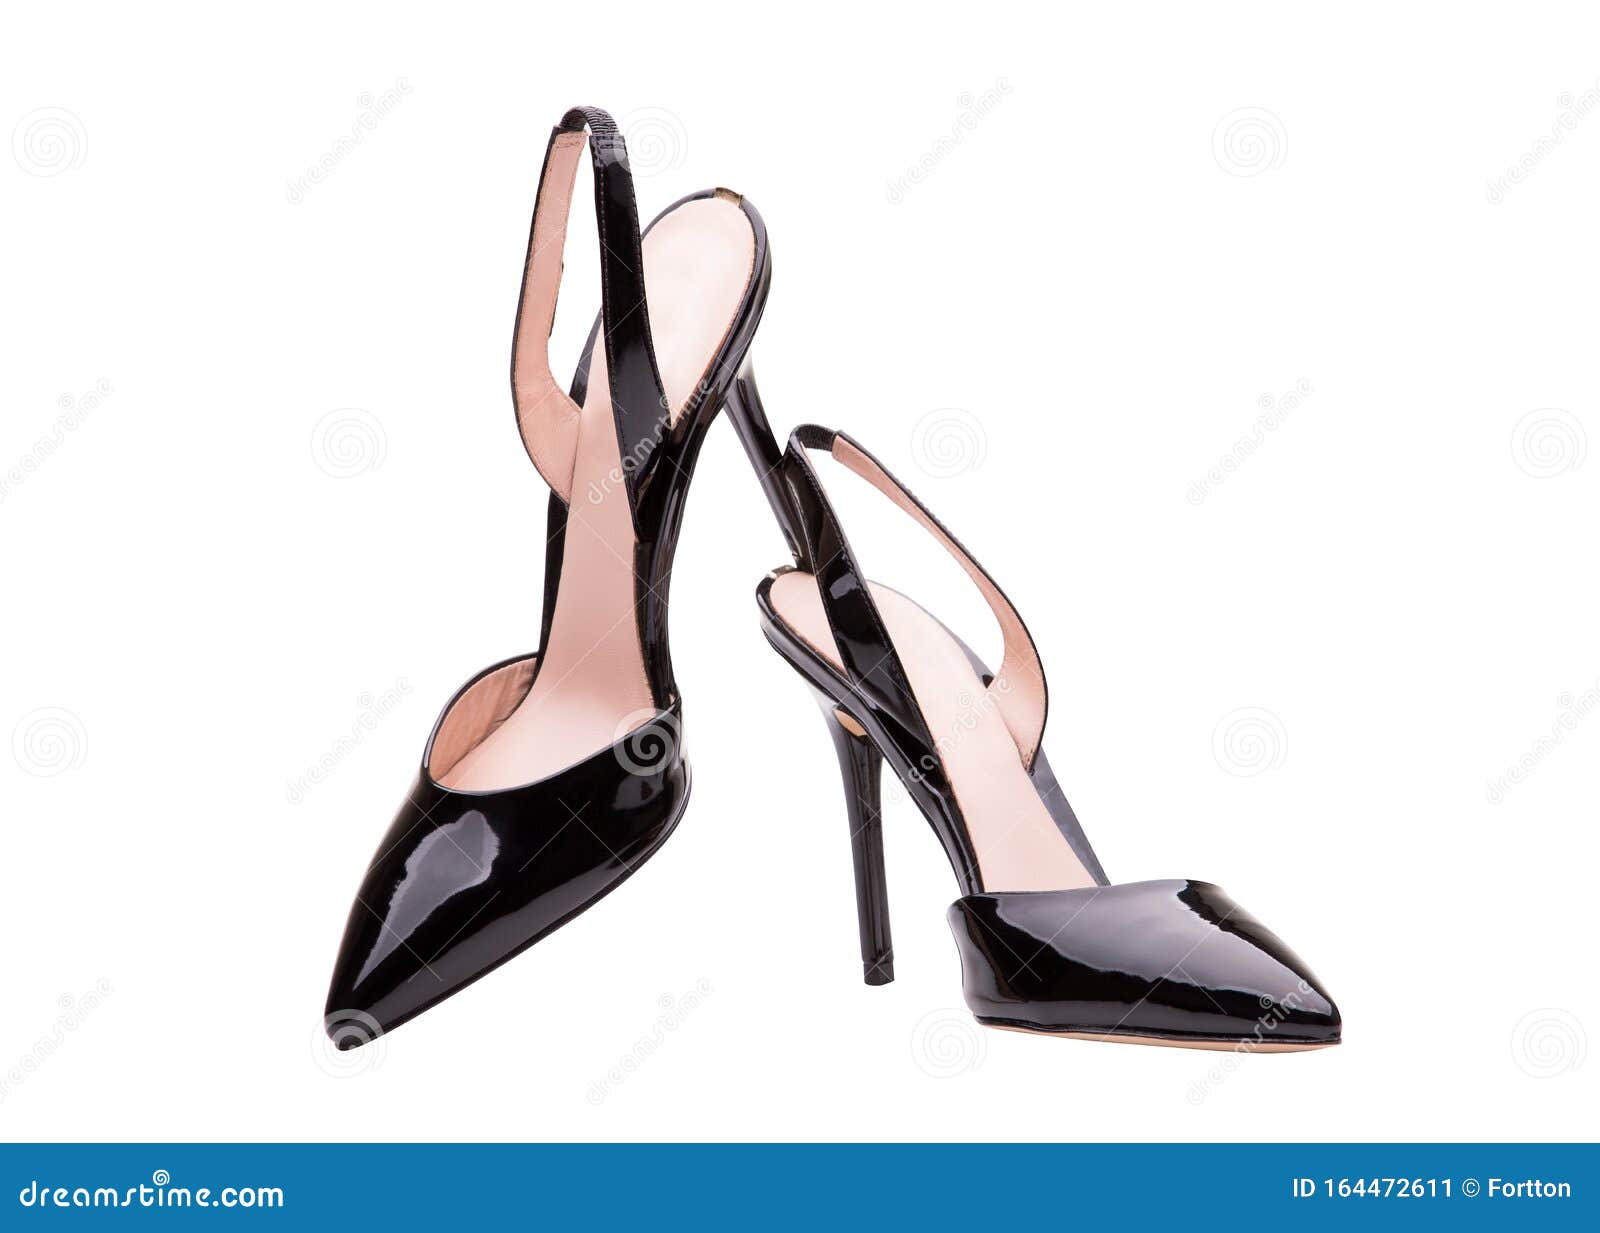 Narrow-toe Patent Leather Shoes Stock Image - Image of footwear, 164472611